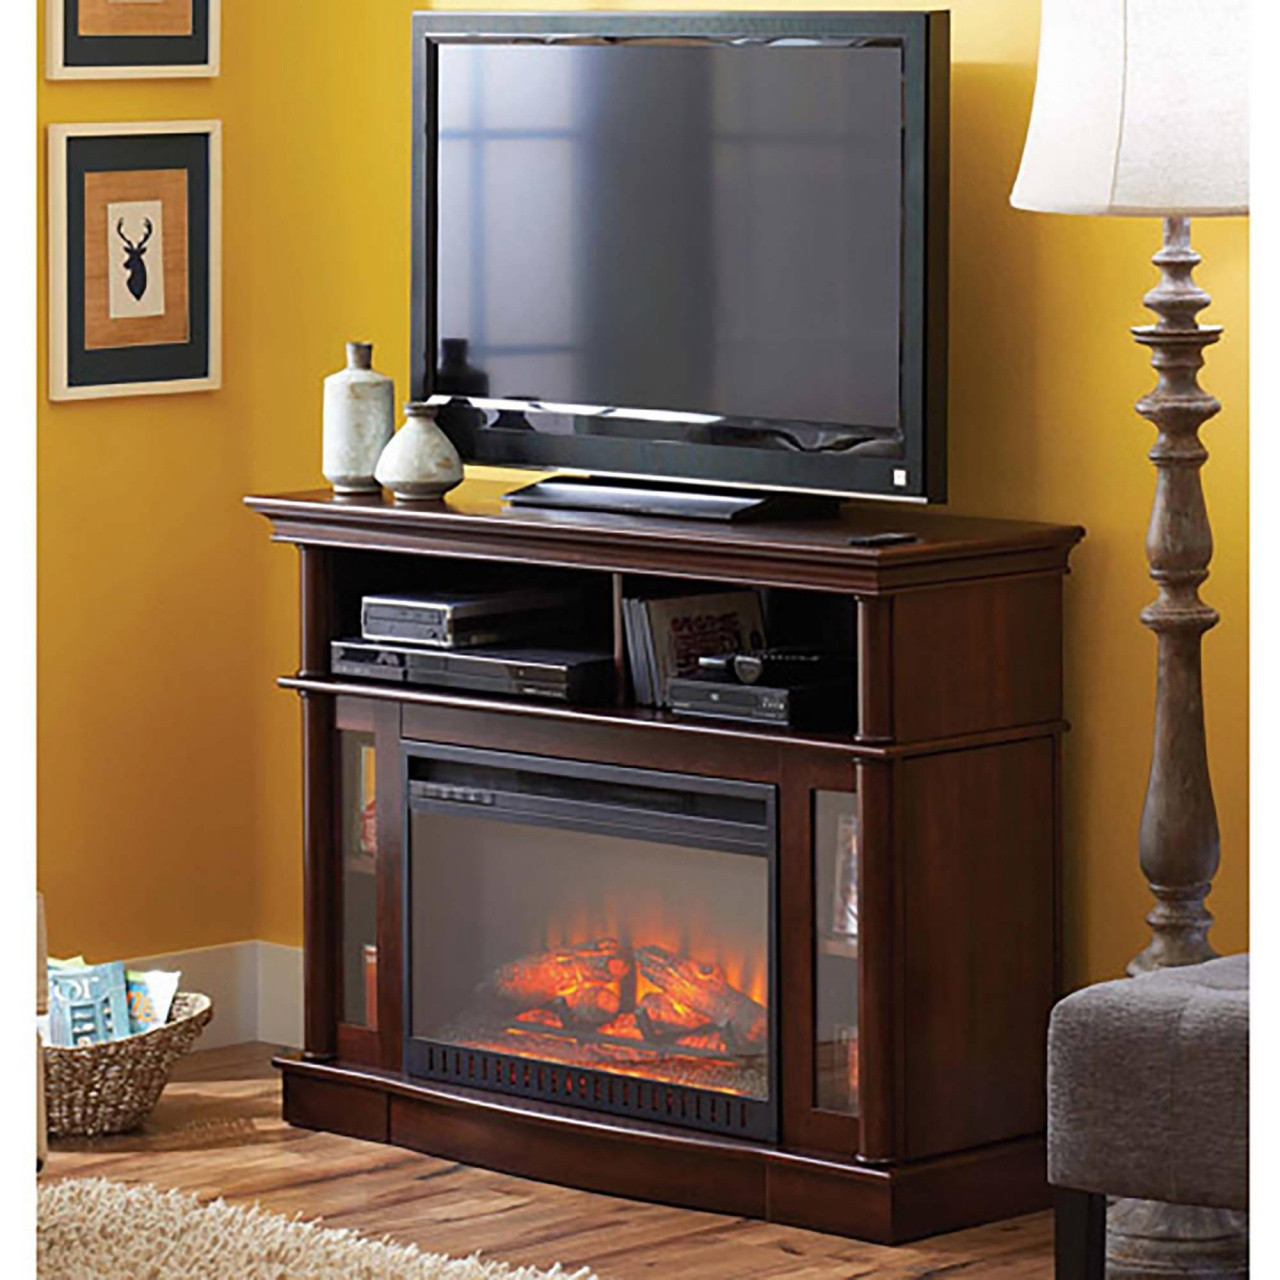 Ember Hearth Electric Fireplace Costco
 Ember Hearth Electric Fireplace Costco – FIREPLACE IDEAS